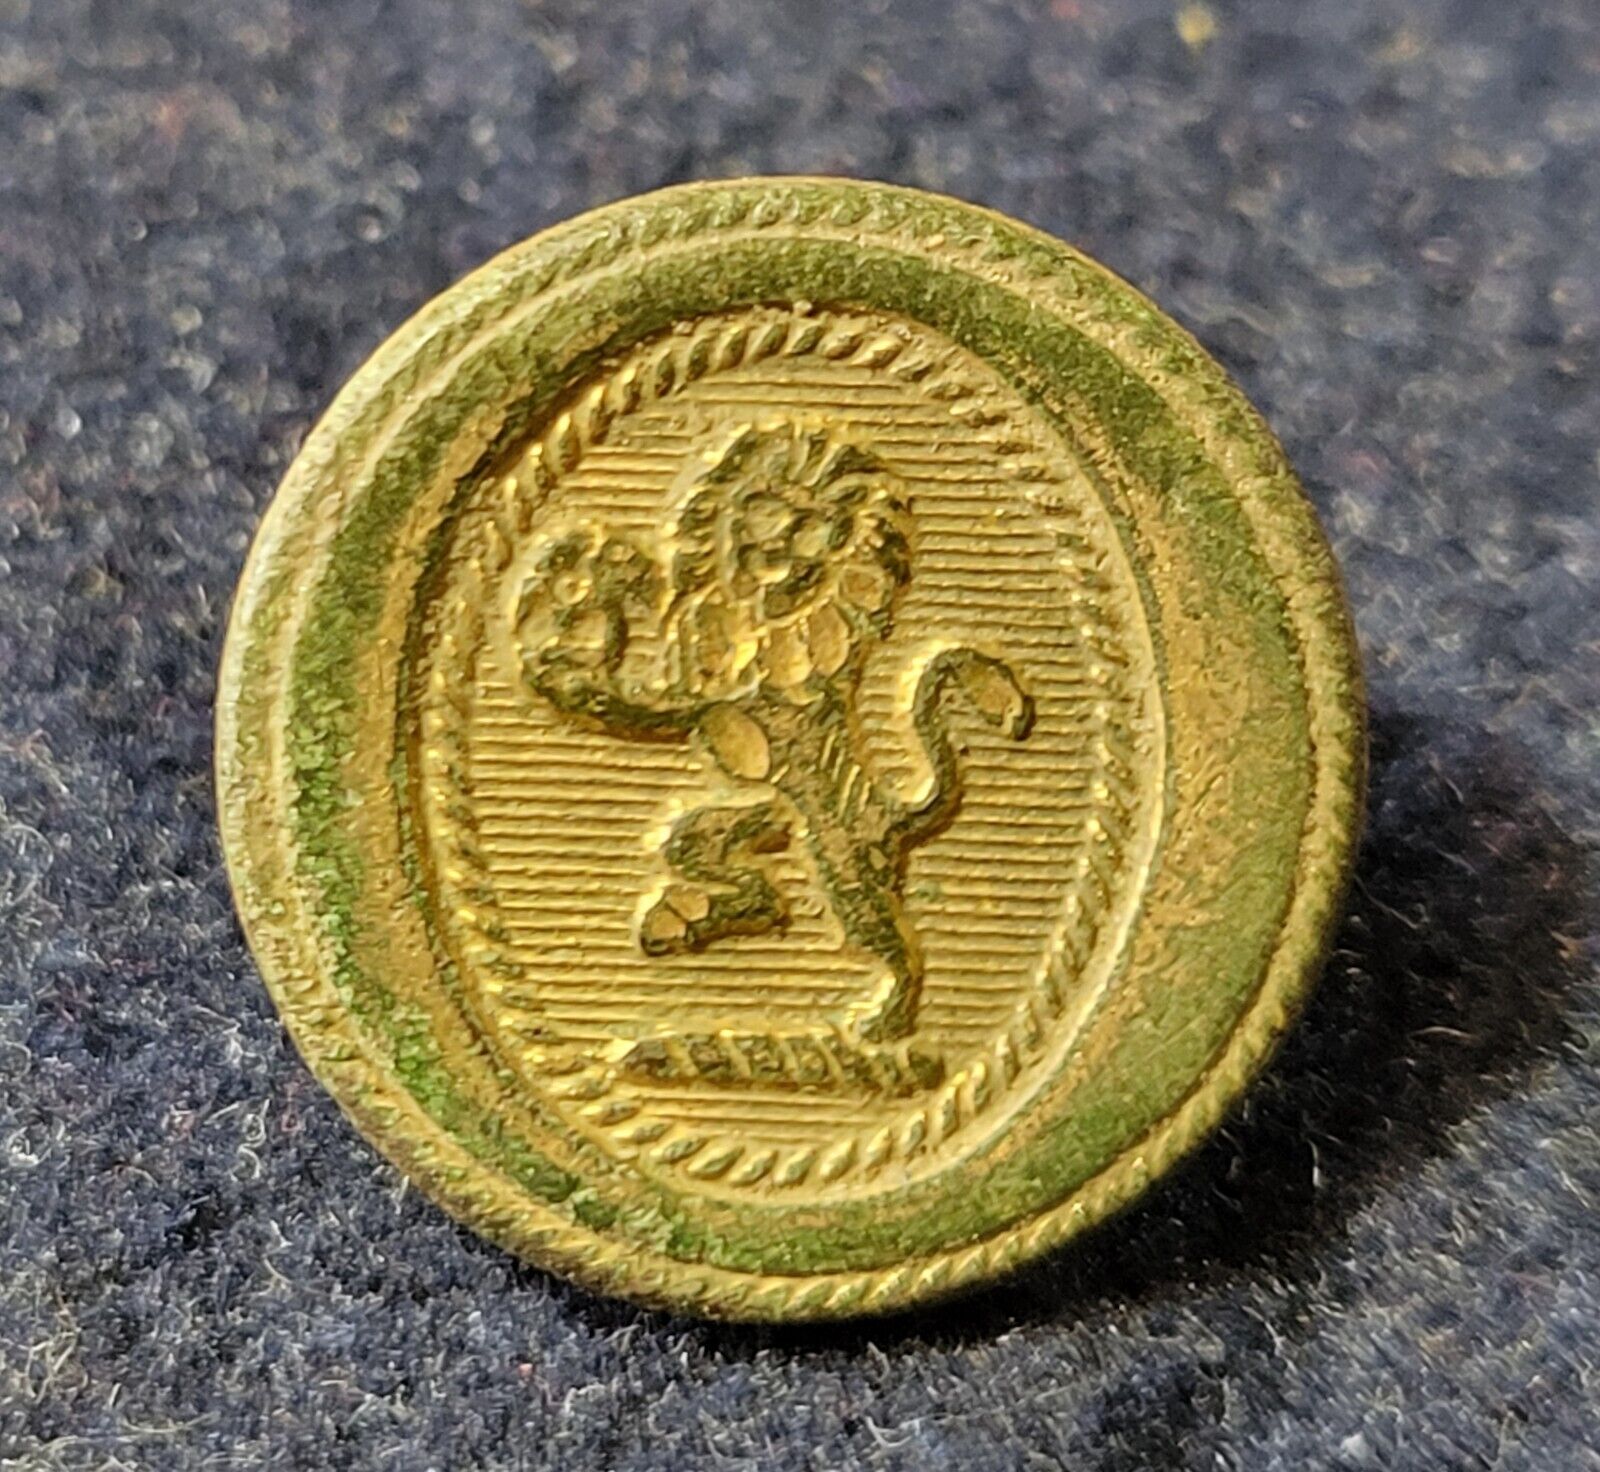 EARLY BITISH EAST INDIA COMPANY OFFICER CUFF SIZE BUTTON LION RAMPANT EXCAVATED